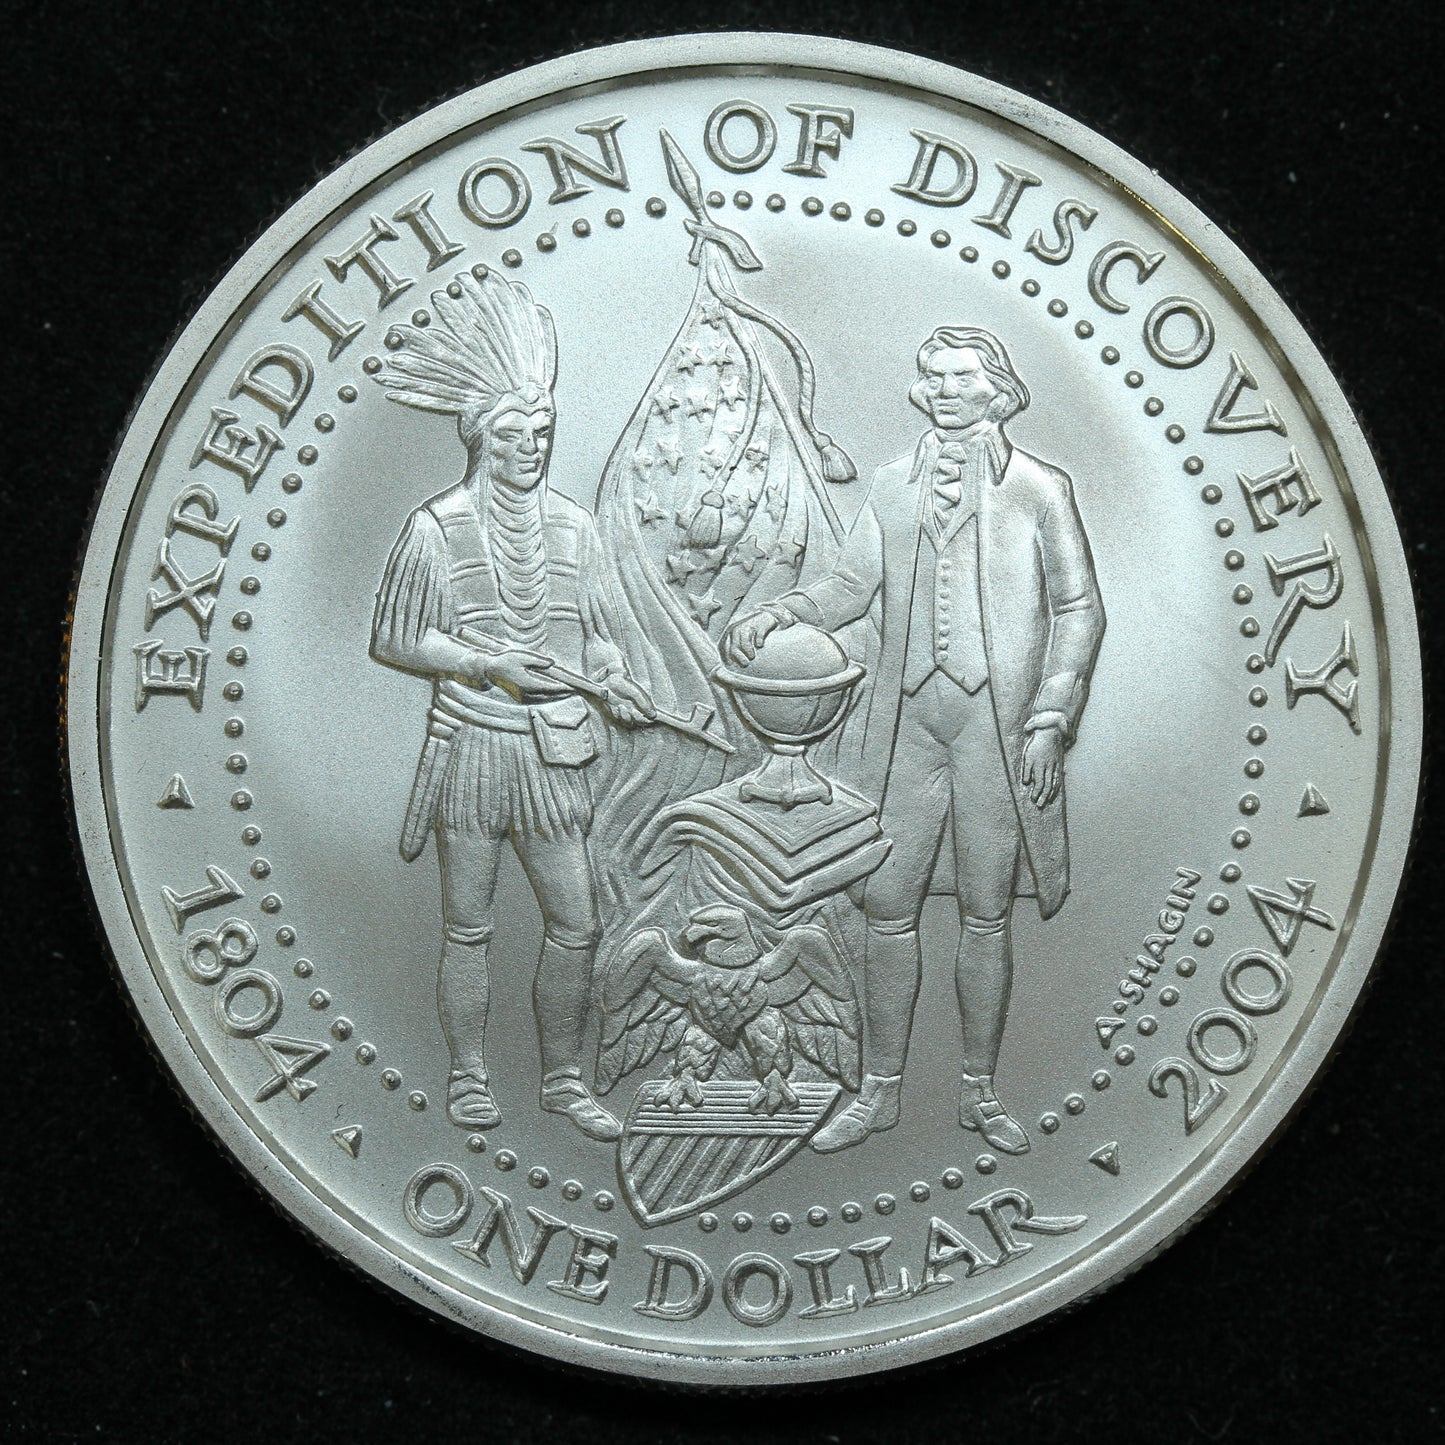 2004 Expedition of Discovery 1 oz .999 Fine Silver Round The Shawnee Tribe